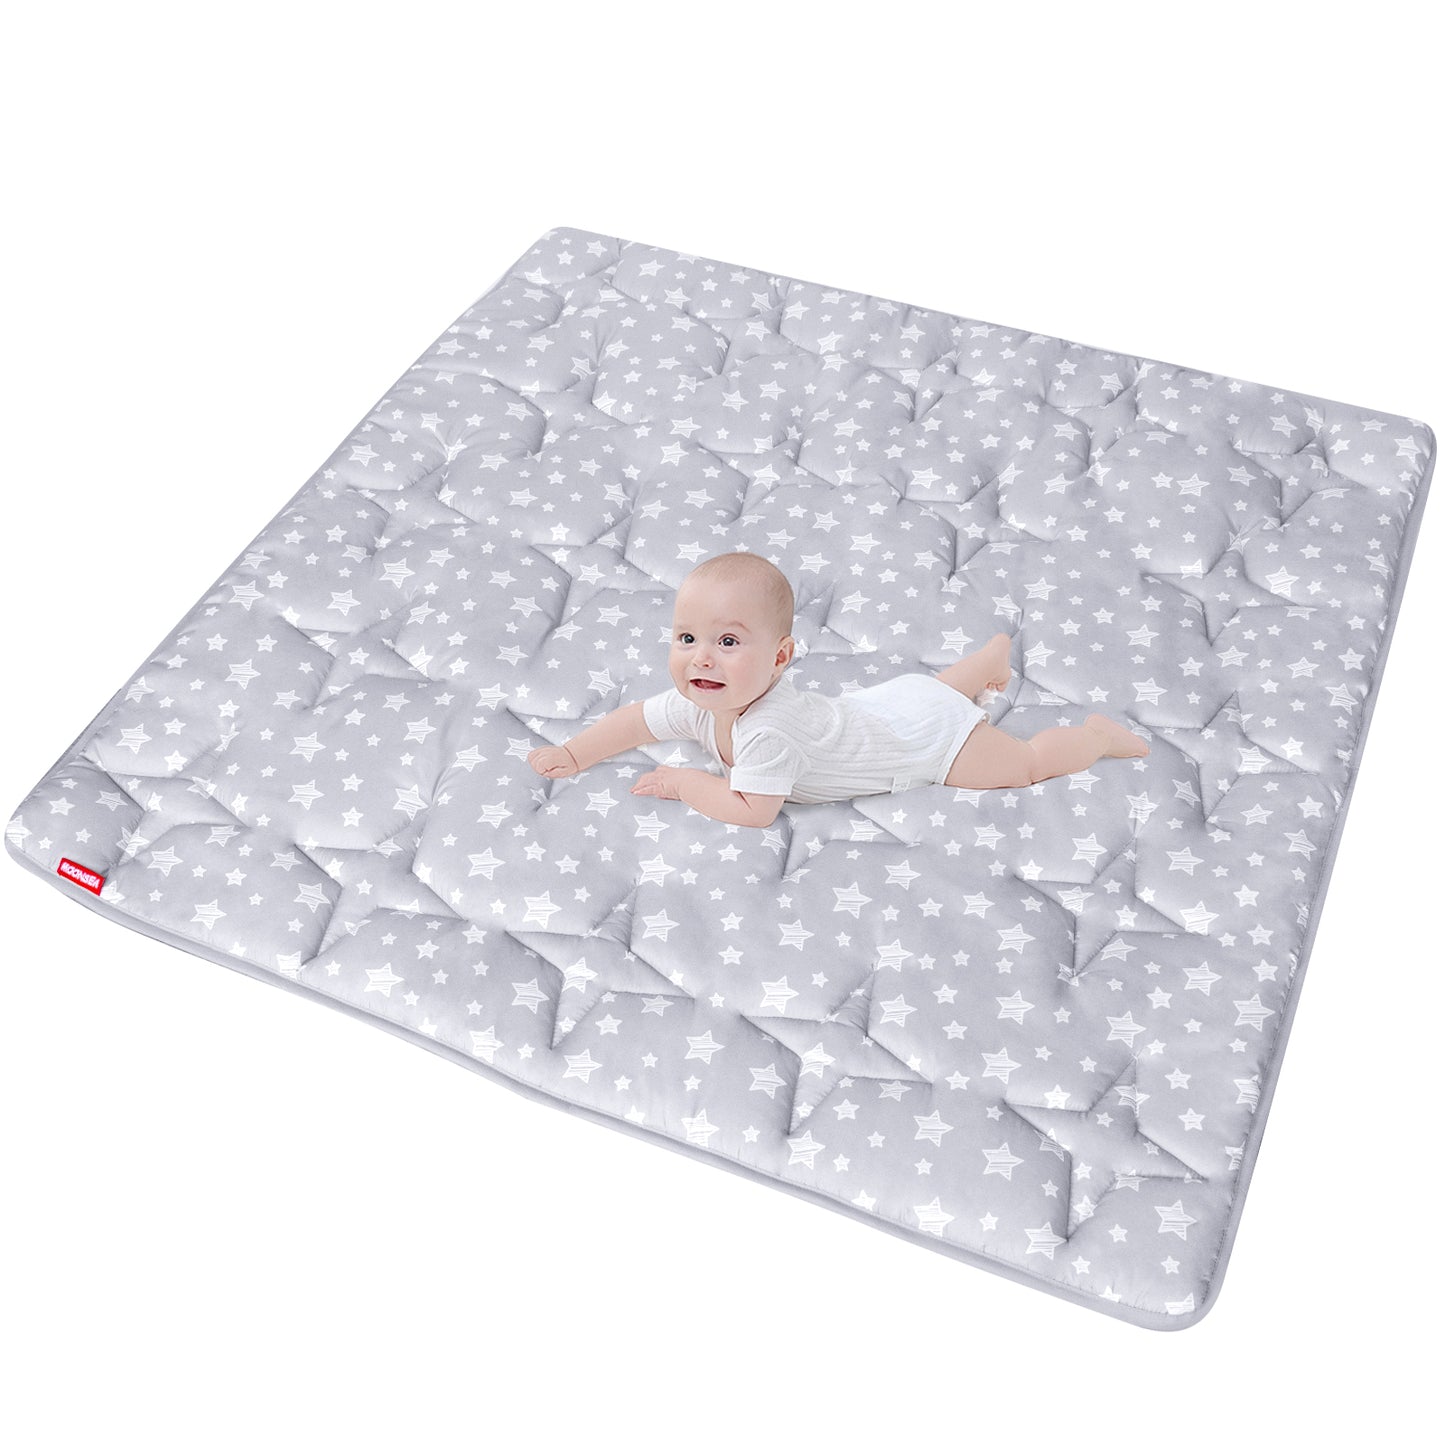 Baby Play Mat | Playpen Mat - 47" x 47", Large Padded Tummy Time Activity Mat for Infant & Toddler, Grey Star - Moonsea Bedding